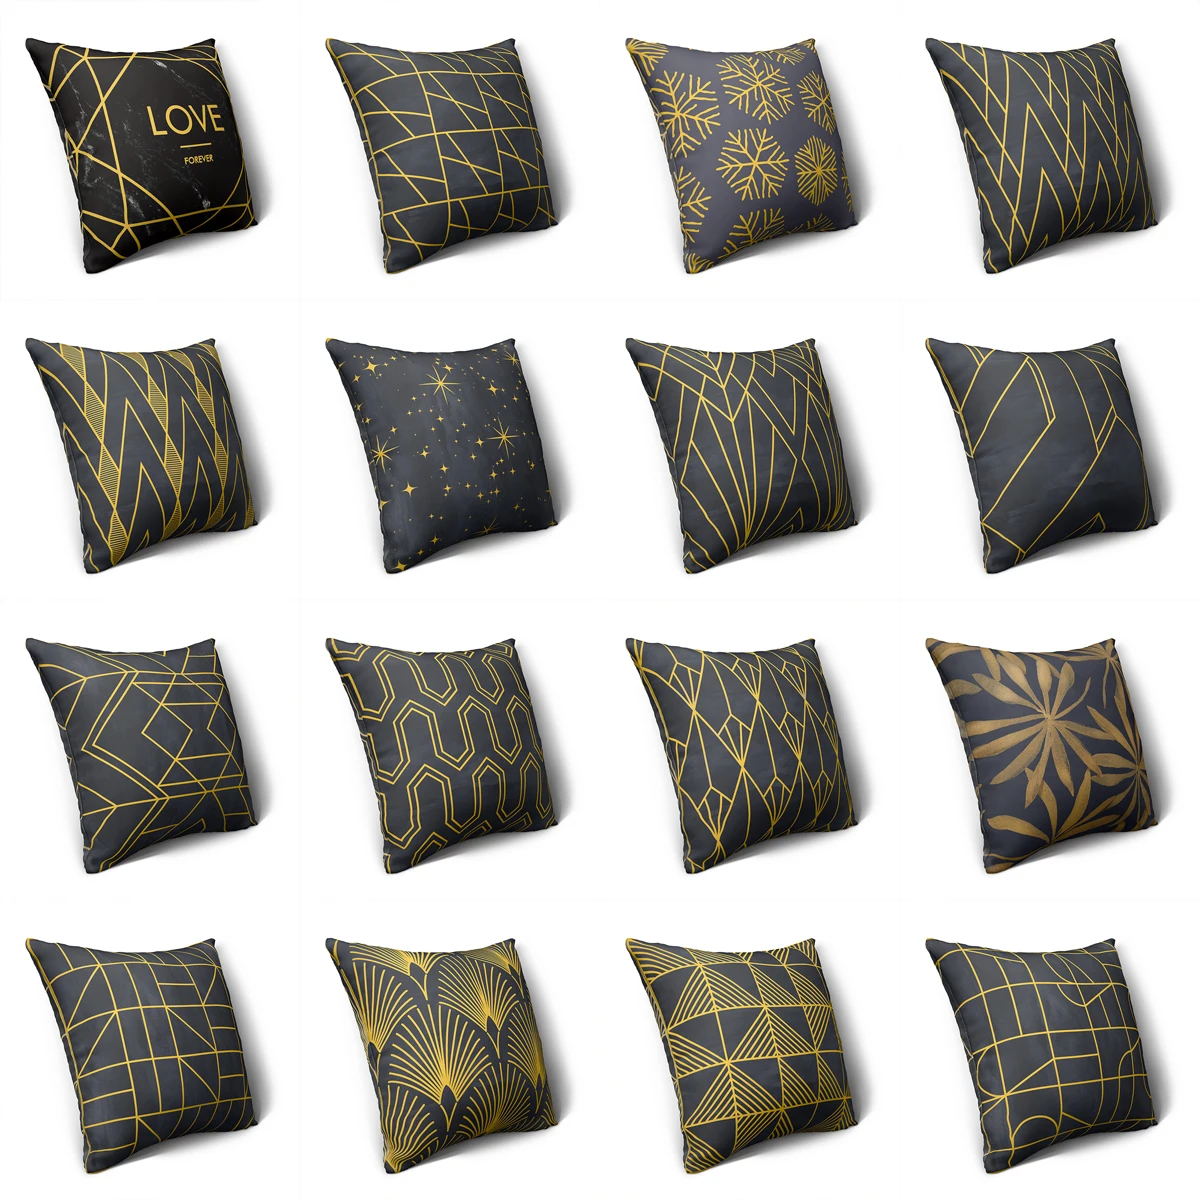 

ZHENHE Creative Black Gold Geometry Pillow Case Double Sided Printing Cushion Cover for Bedroom Sofa Decor 18x18 Inch （45x45cm）